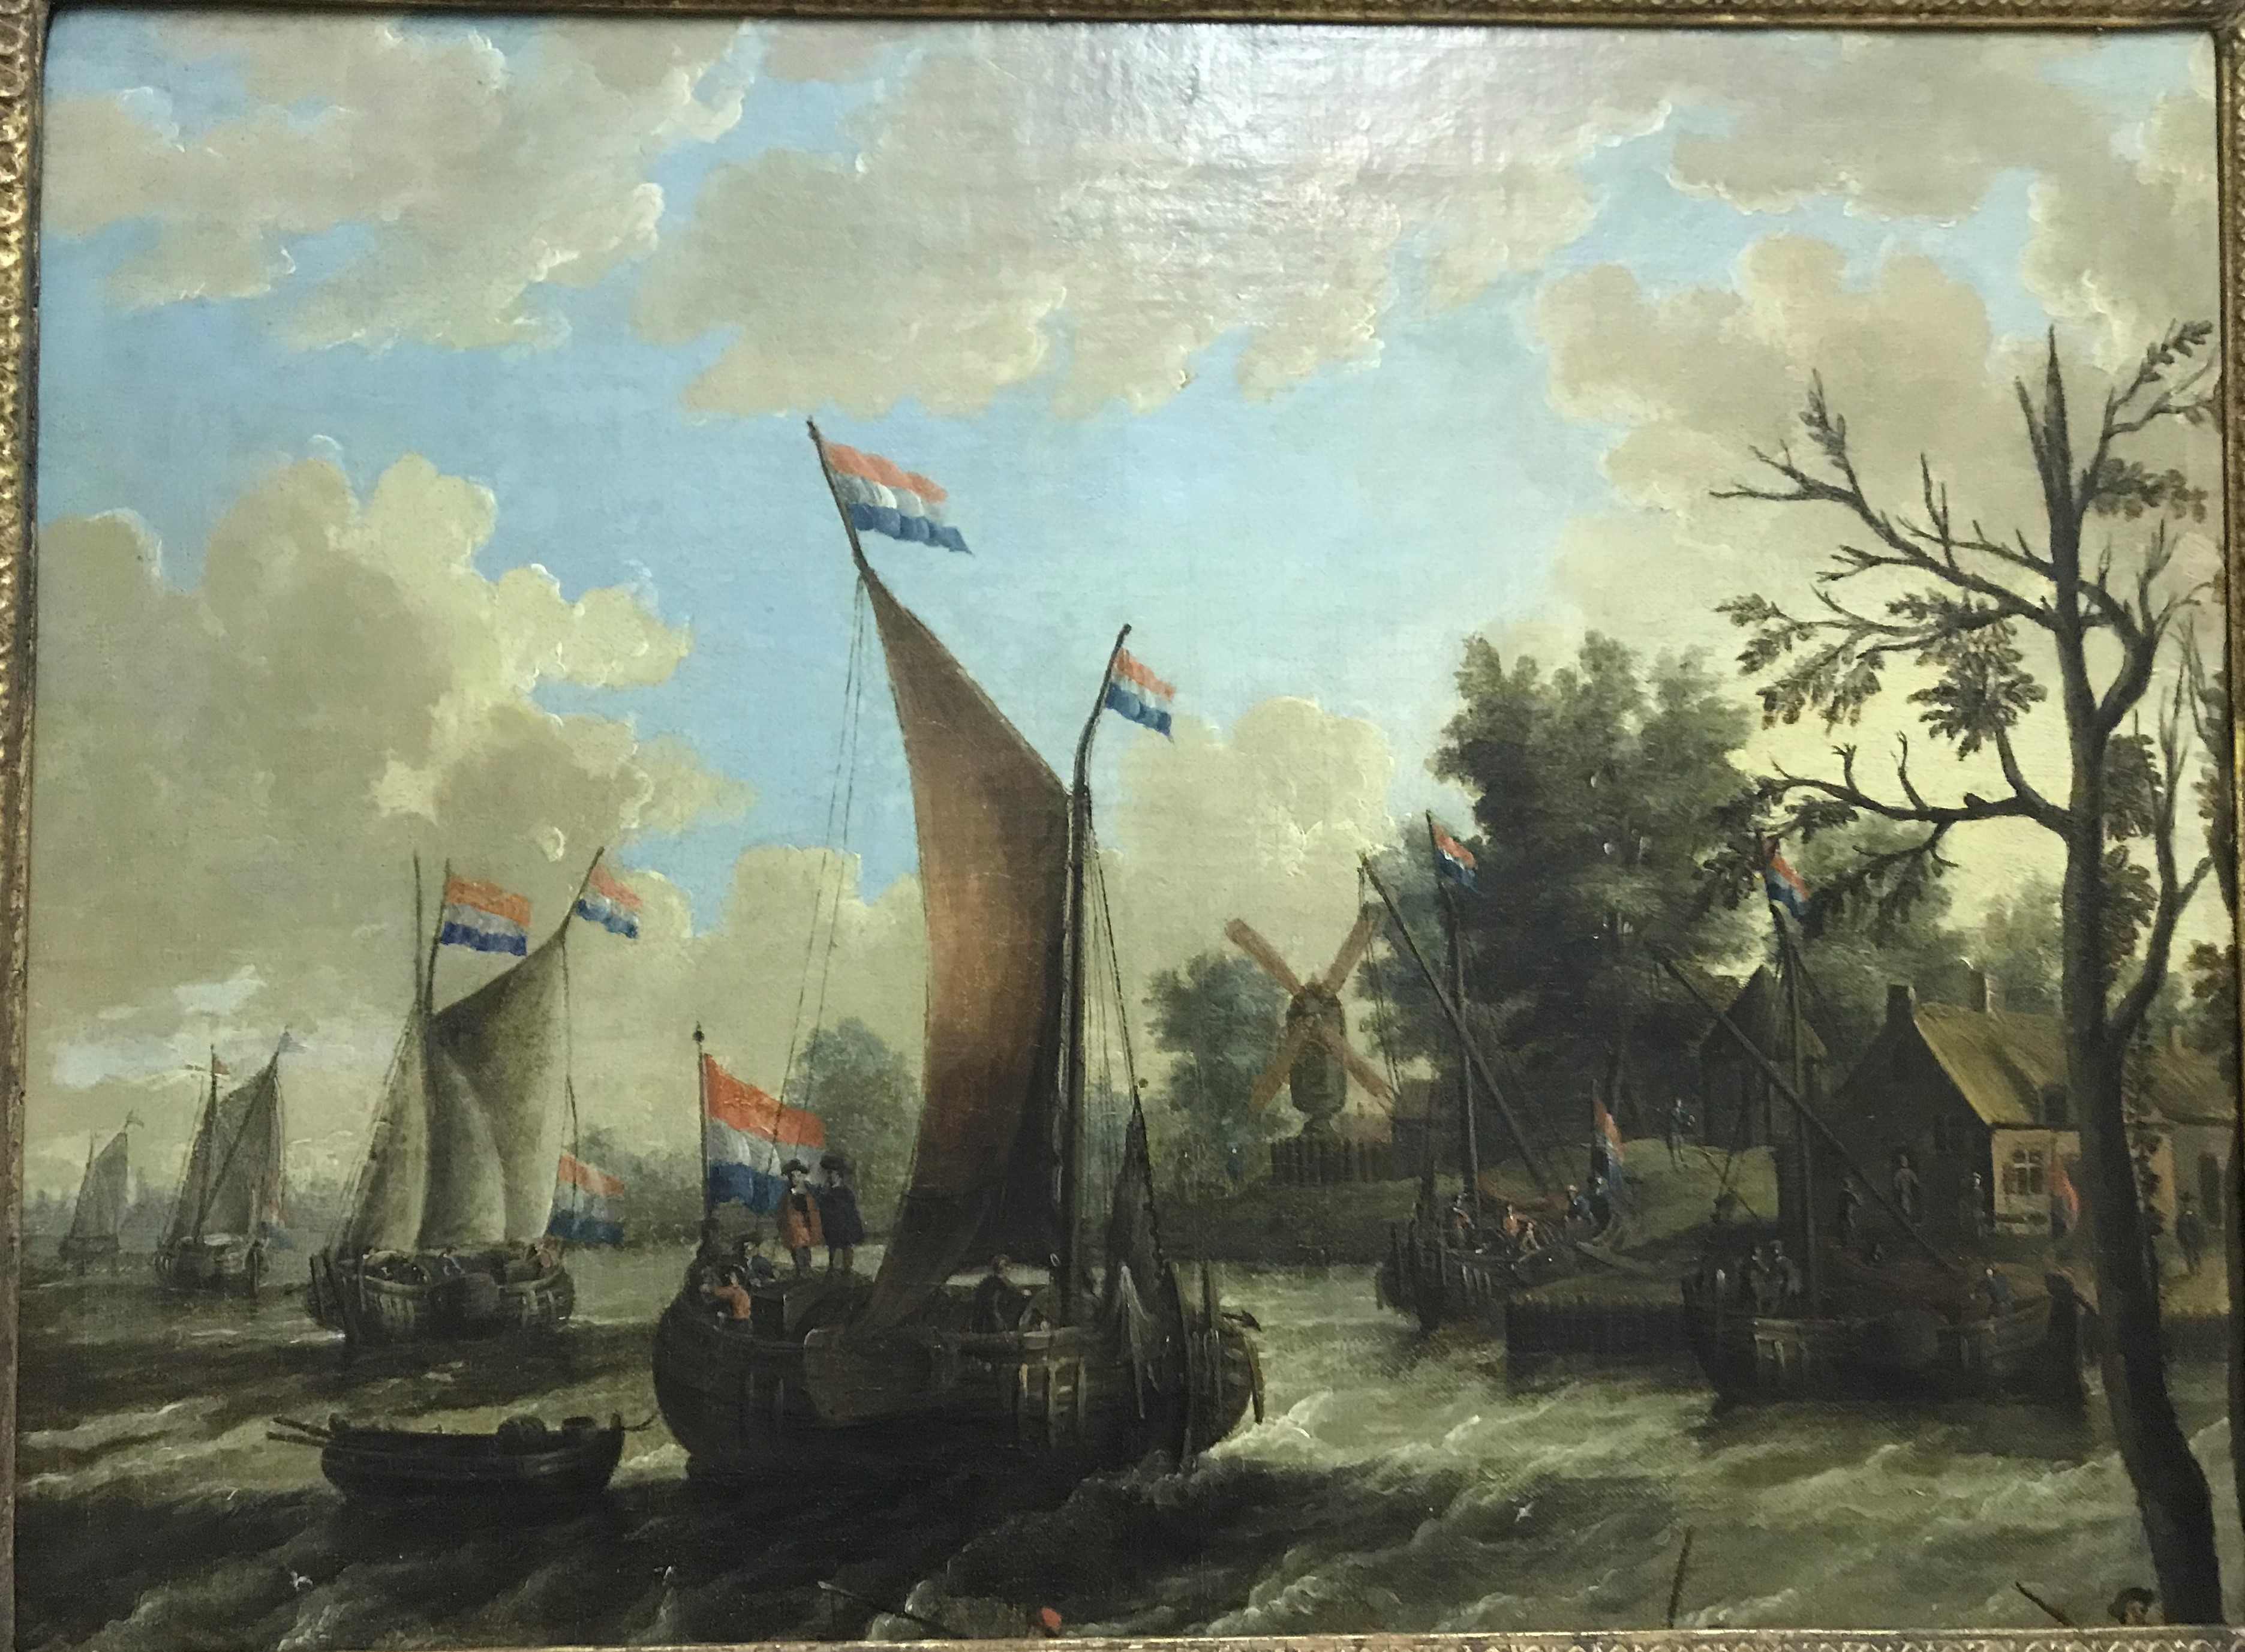 SCHOOL OF ABRAHAM STORCK "A river scene with boats and figures", study of Dutch sailing vessels on a